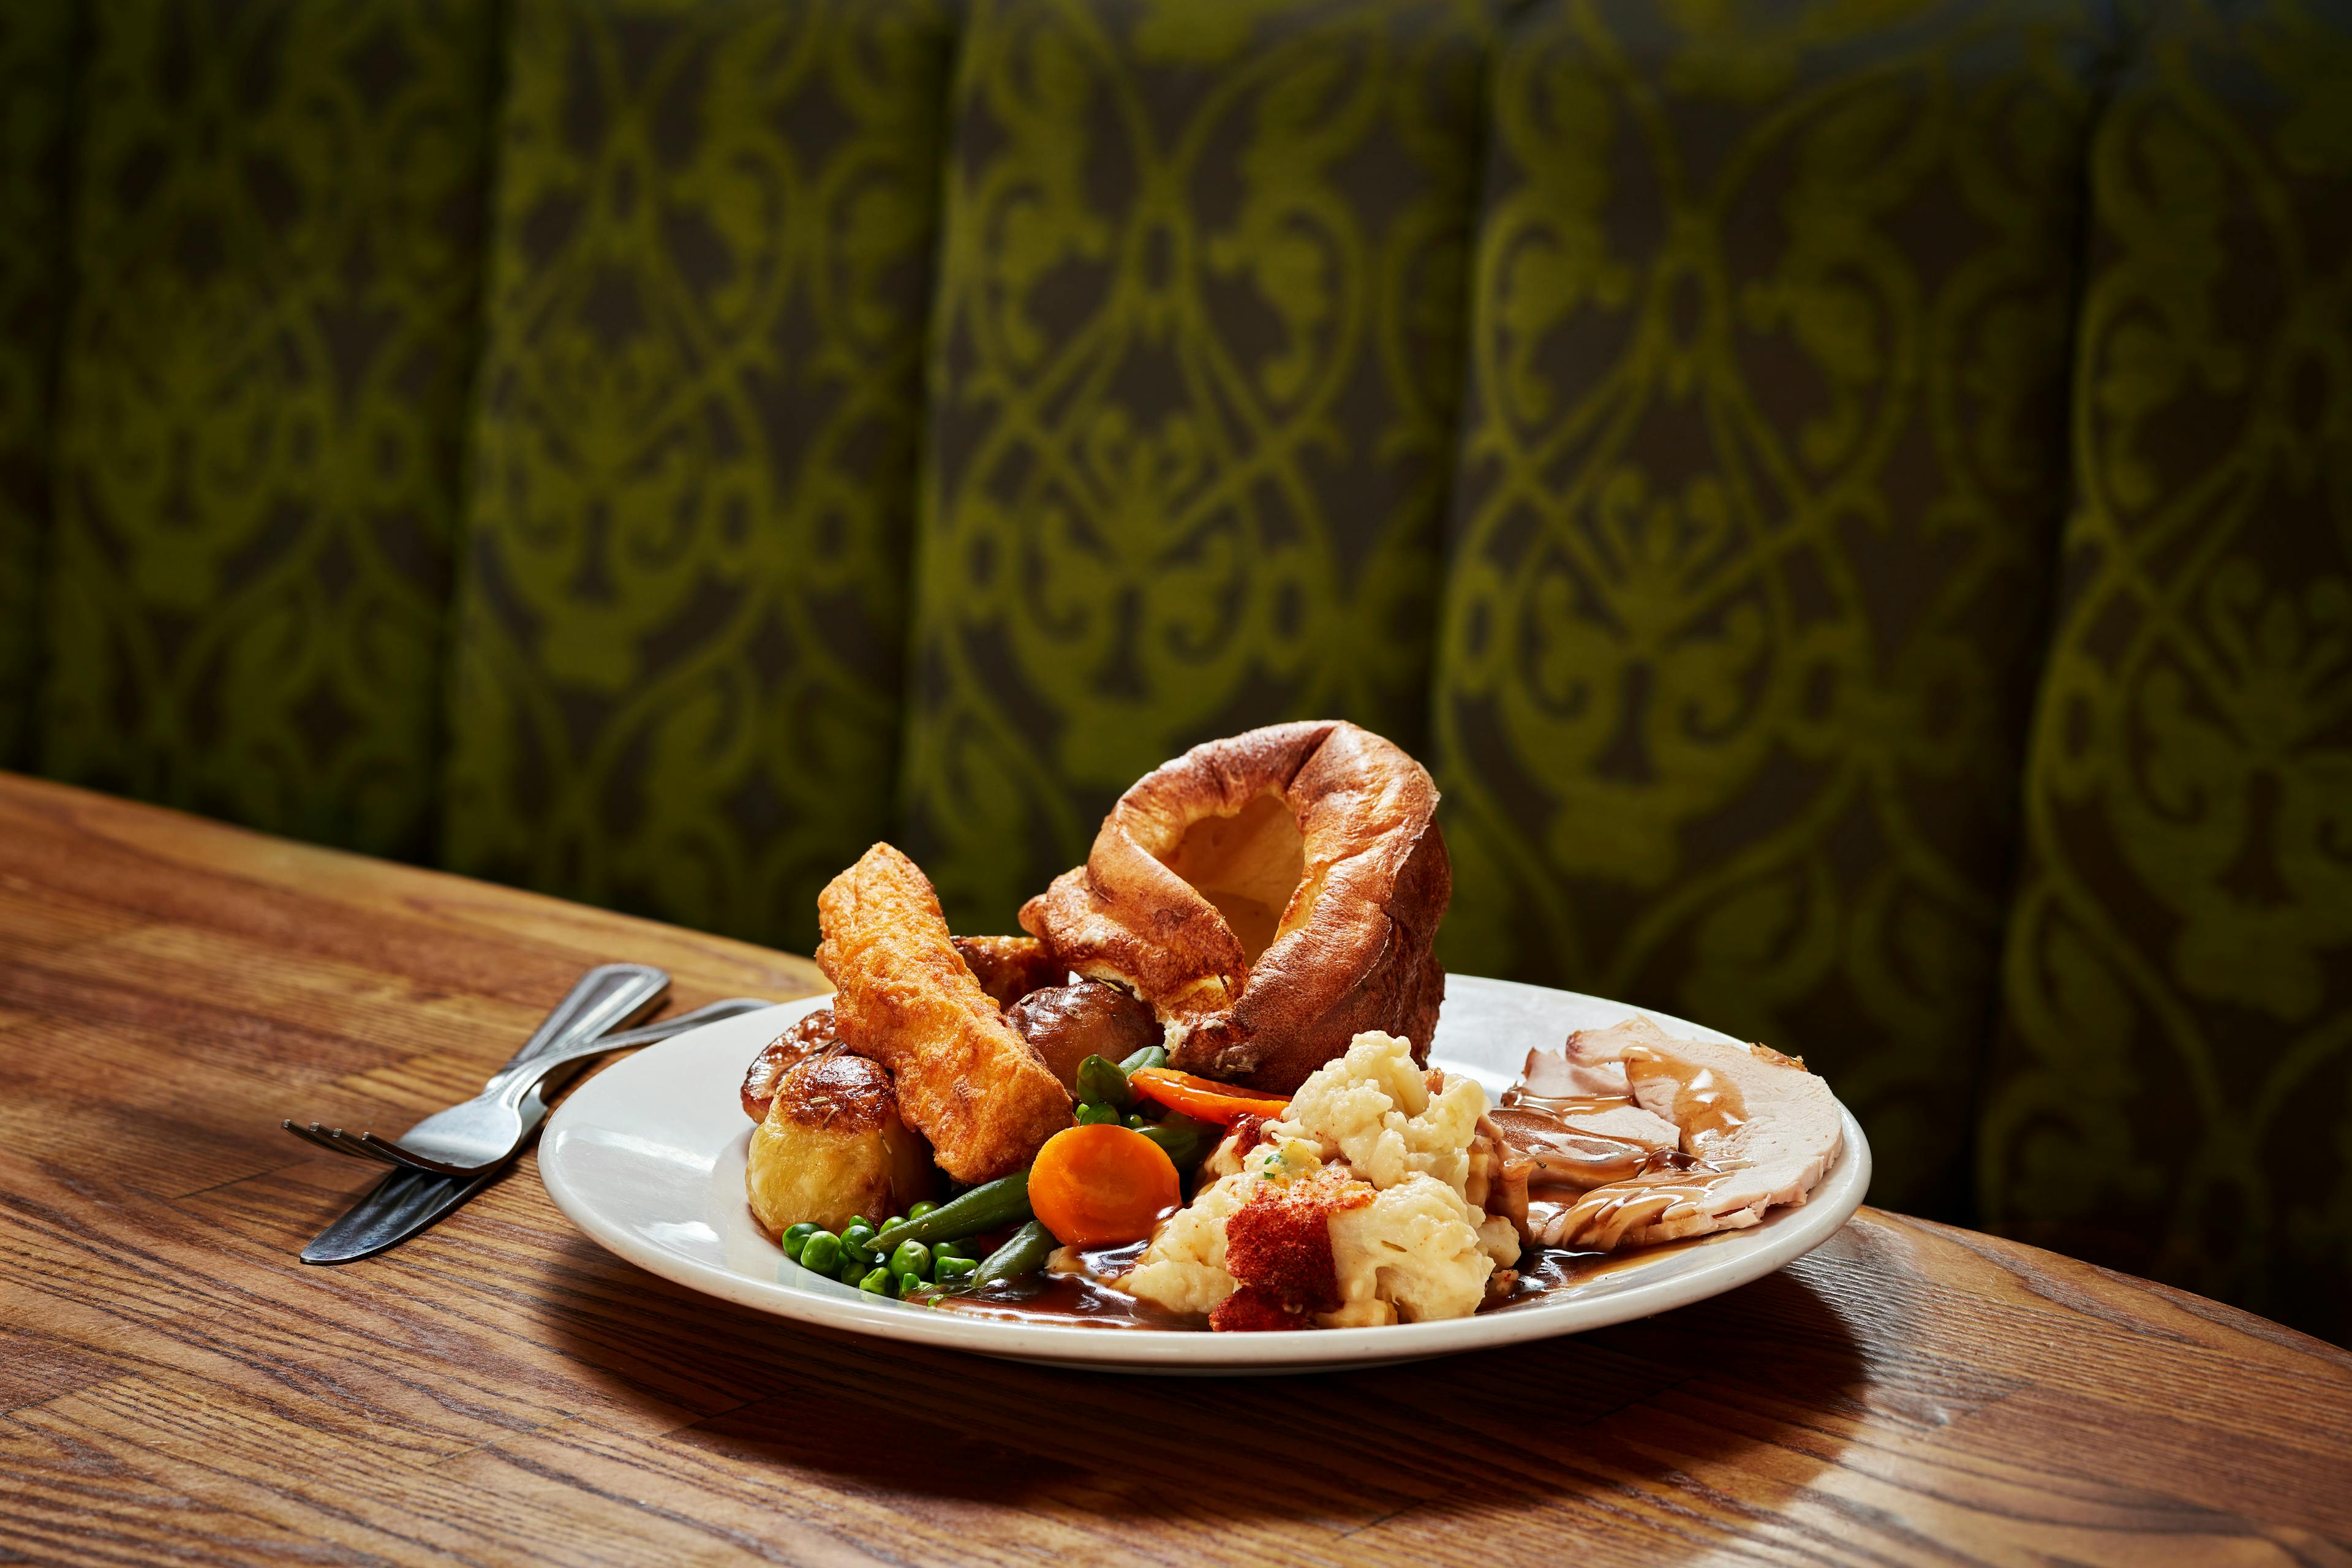 Unwrap the Magic of Memorable Moments at Castle Carvery